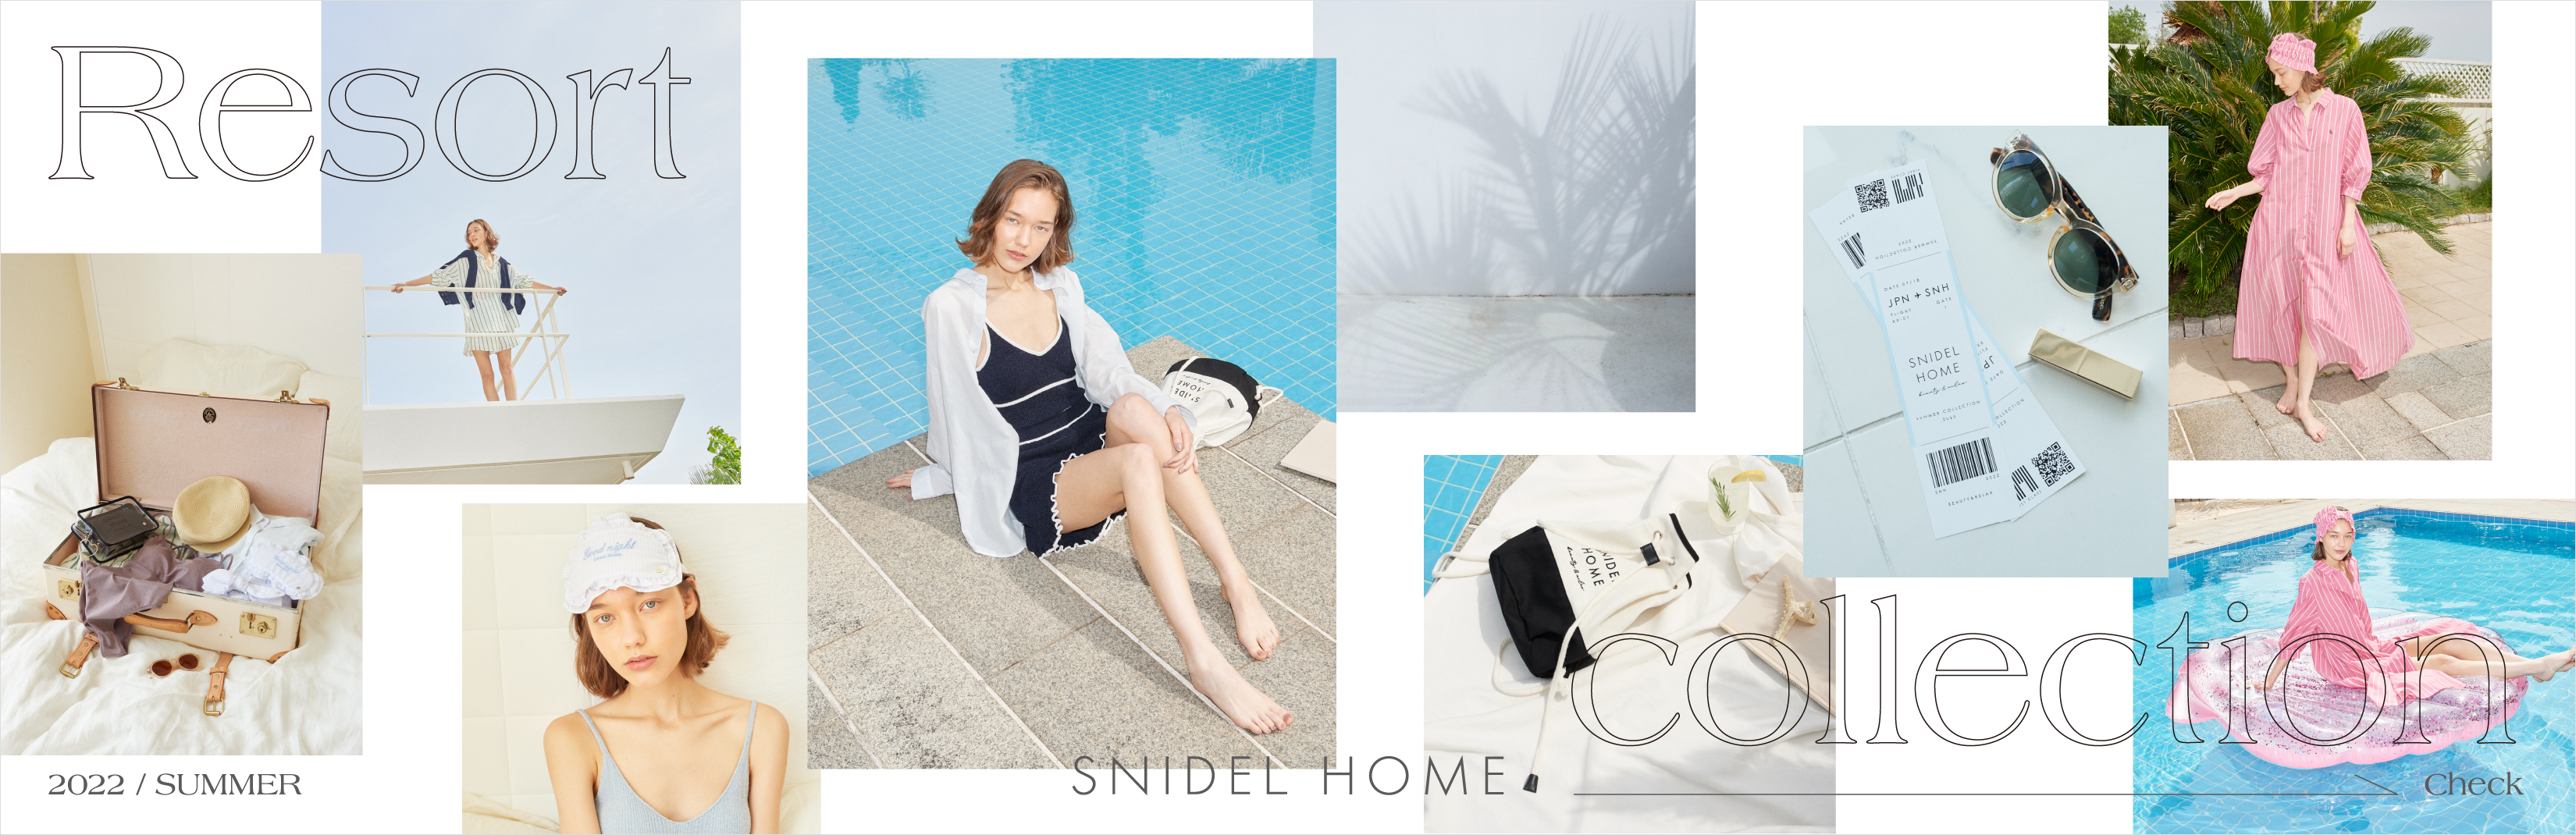 SNIDEL HOME -RESORT COLLECTION-